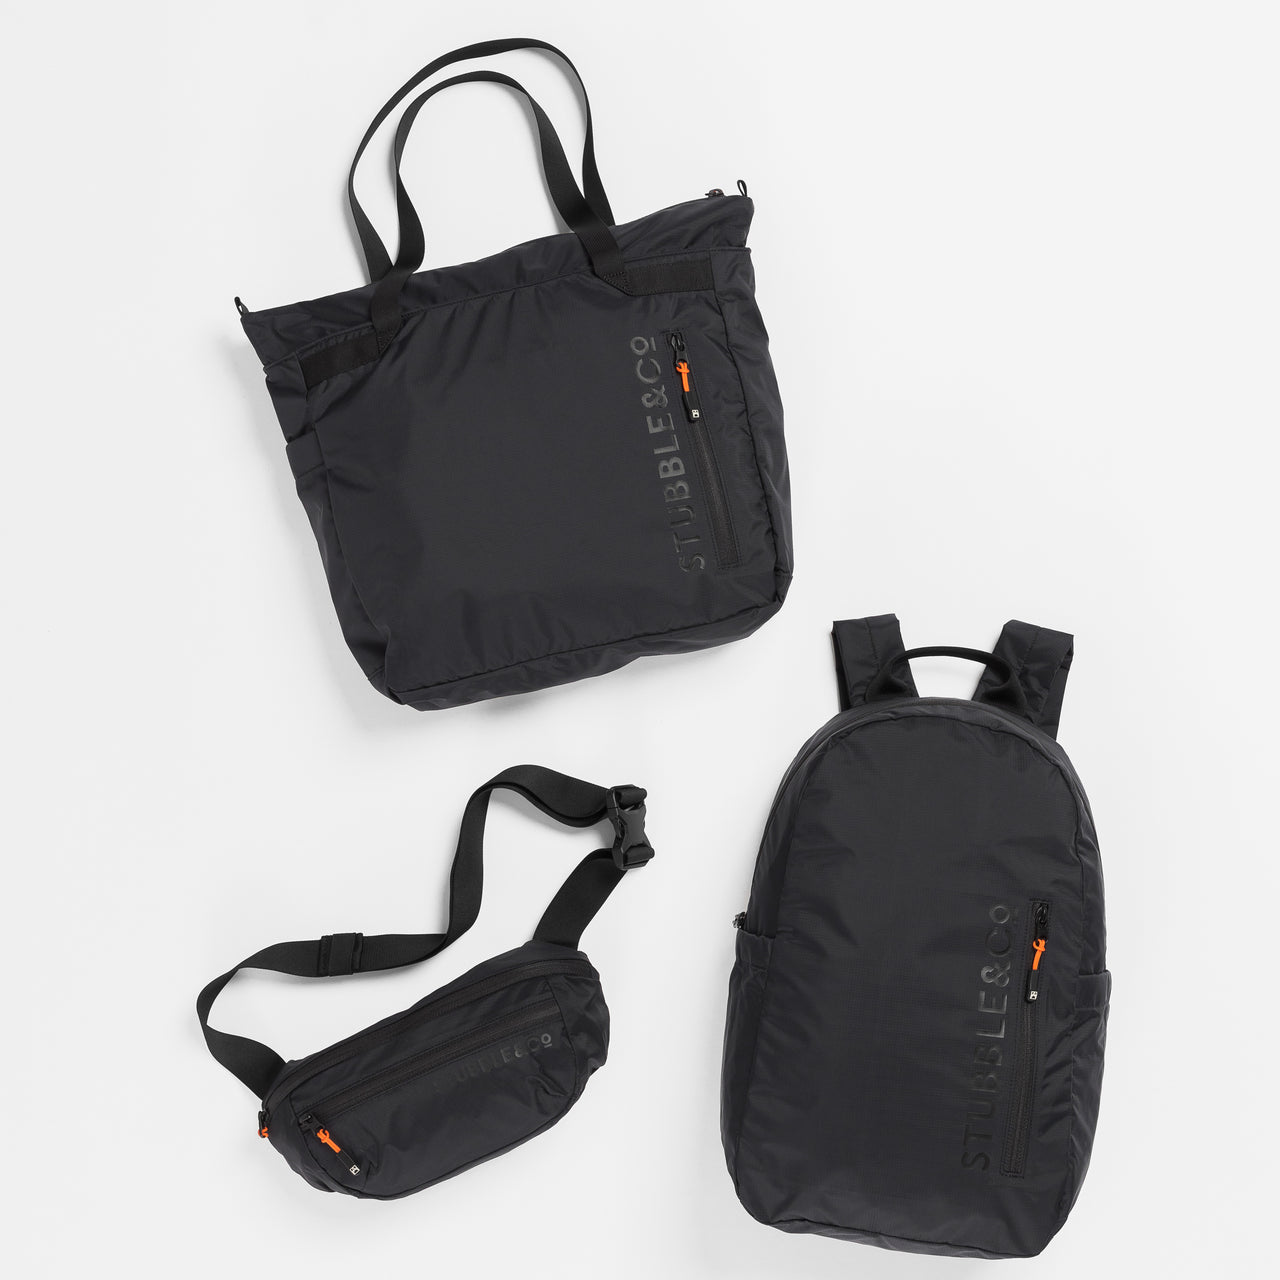 Collection of the All Black packable Ultra Light Bag